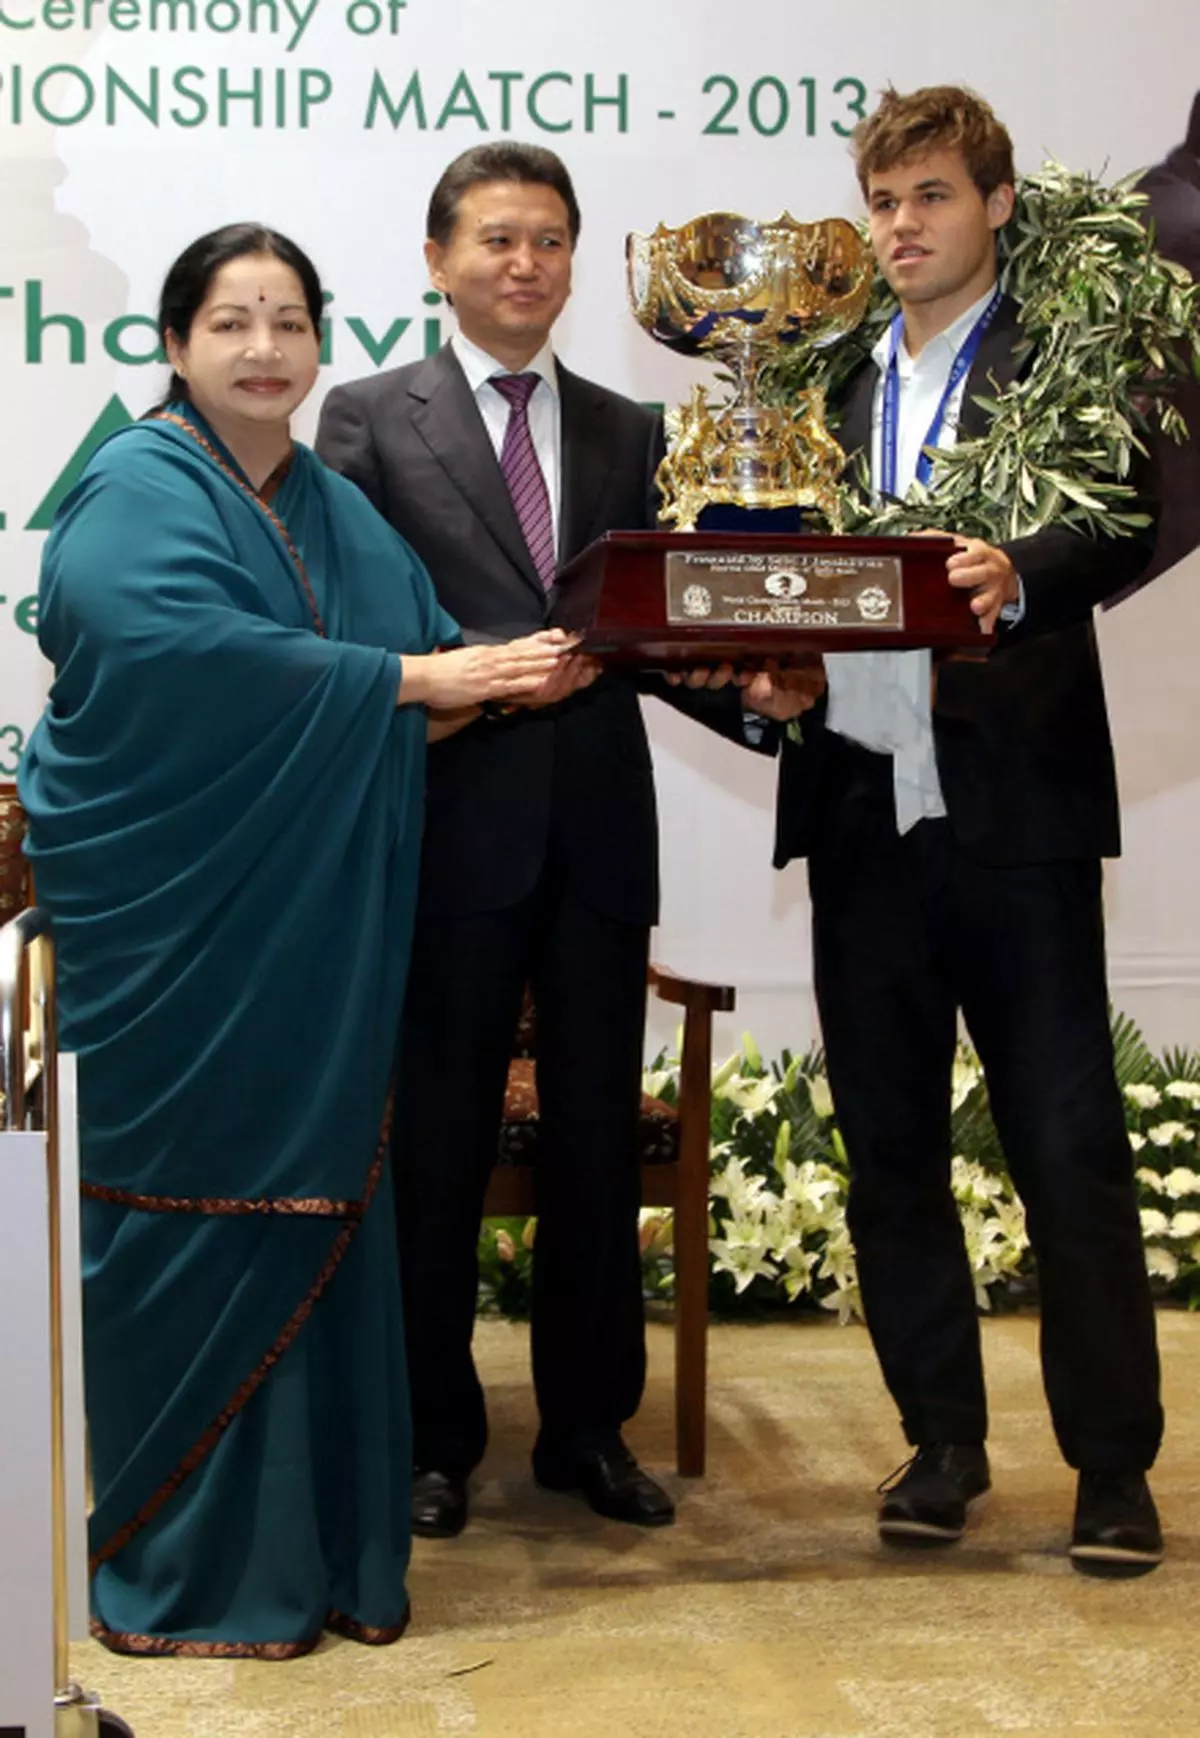 World chess champion Viswanathan Anand of India holds a trophy at an award  presentation ceremony of the FIDE World Chess Championship in Moscow,  Russia, Thursday, May 31, 2012. Anand oretained his title